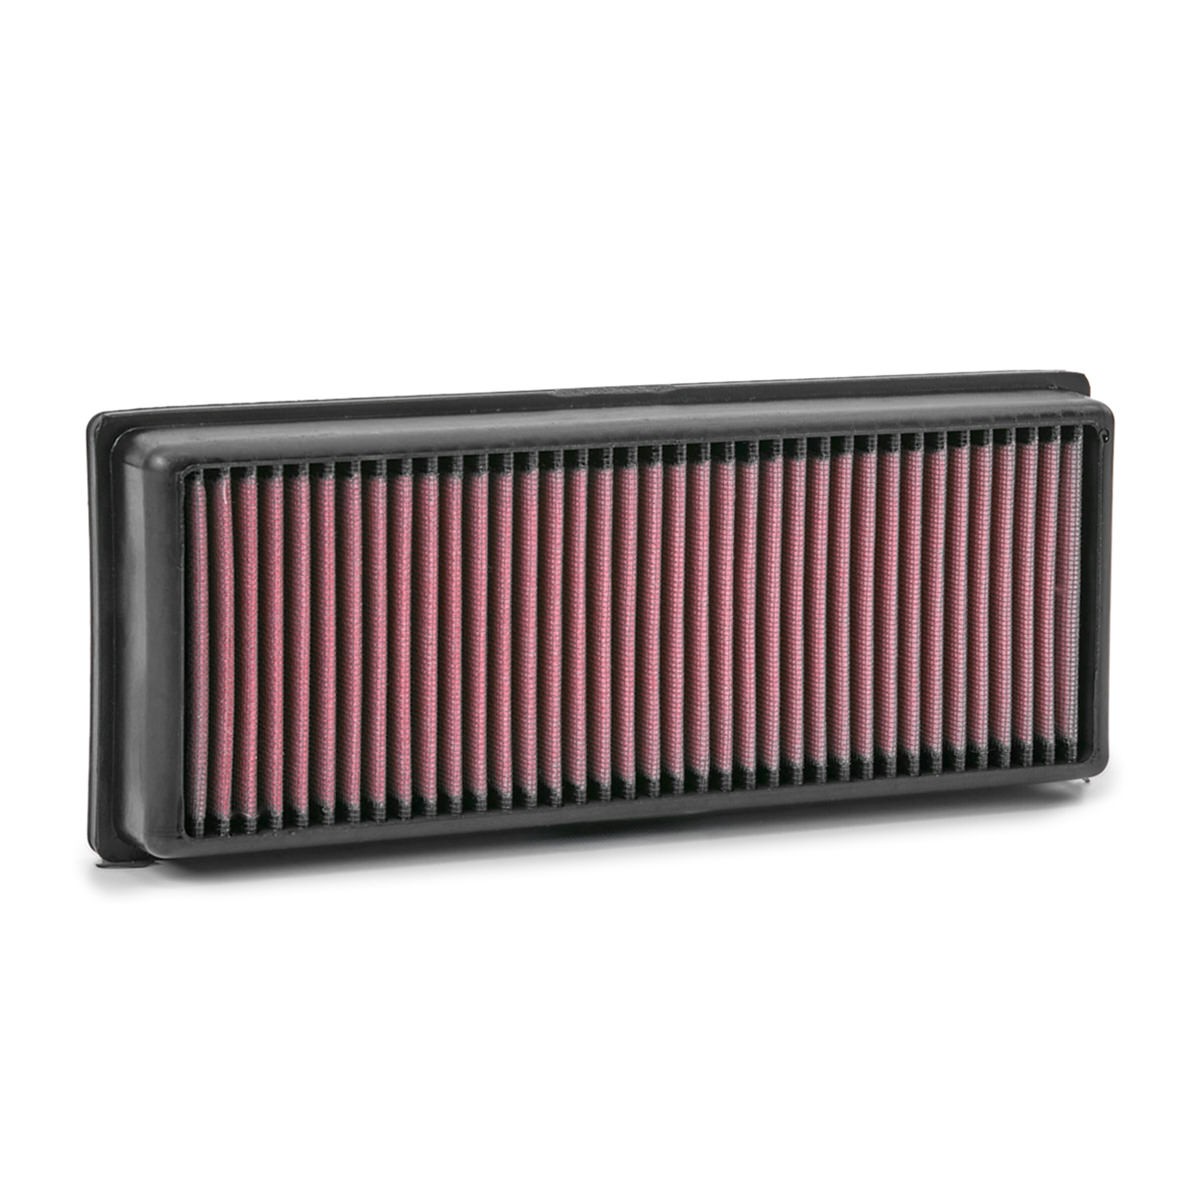 K&N Filters Air filter 33-2945 for AUDI A4, A5, Q5